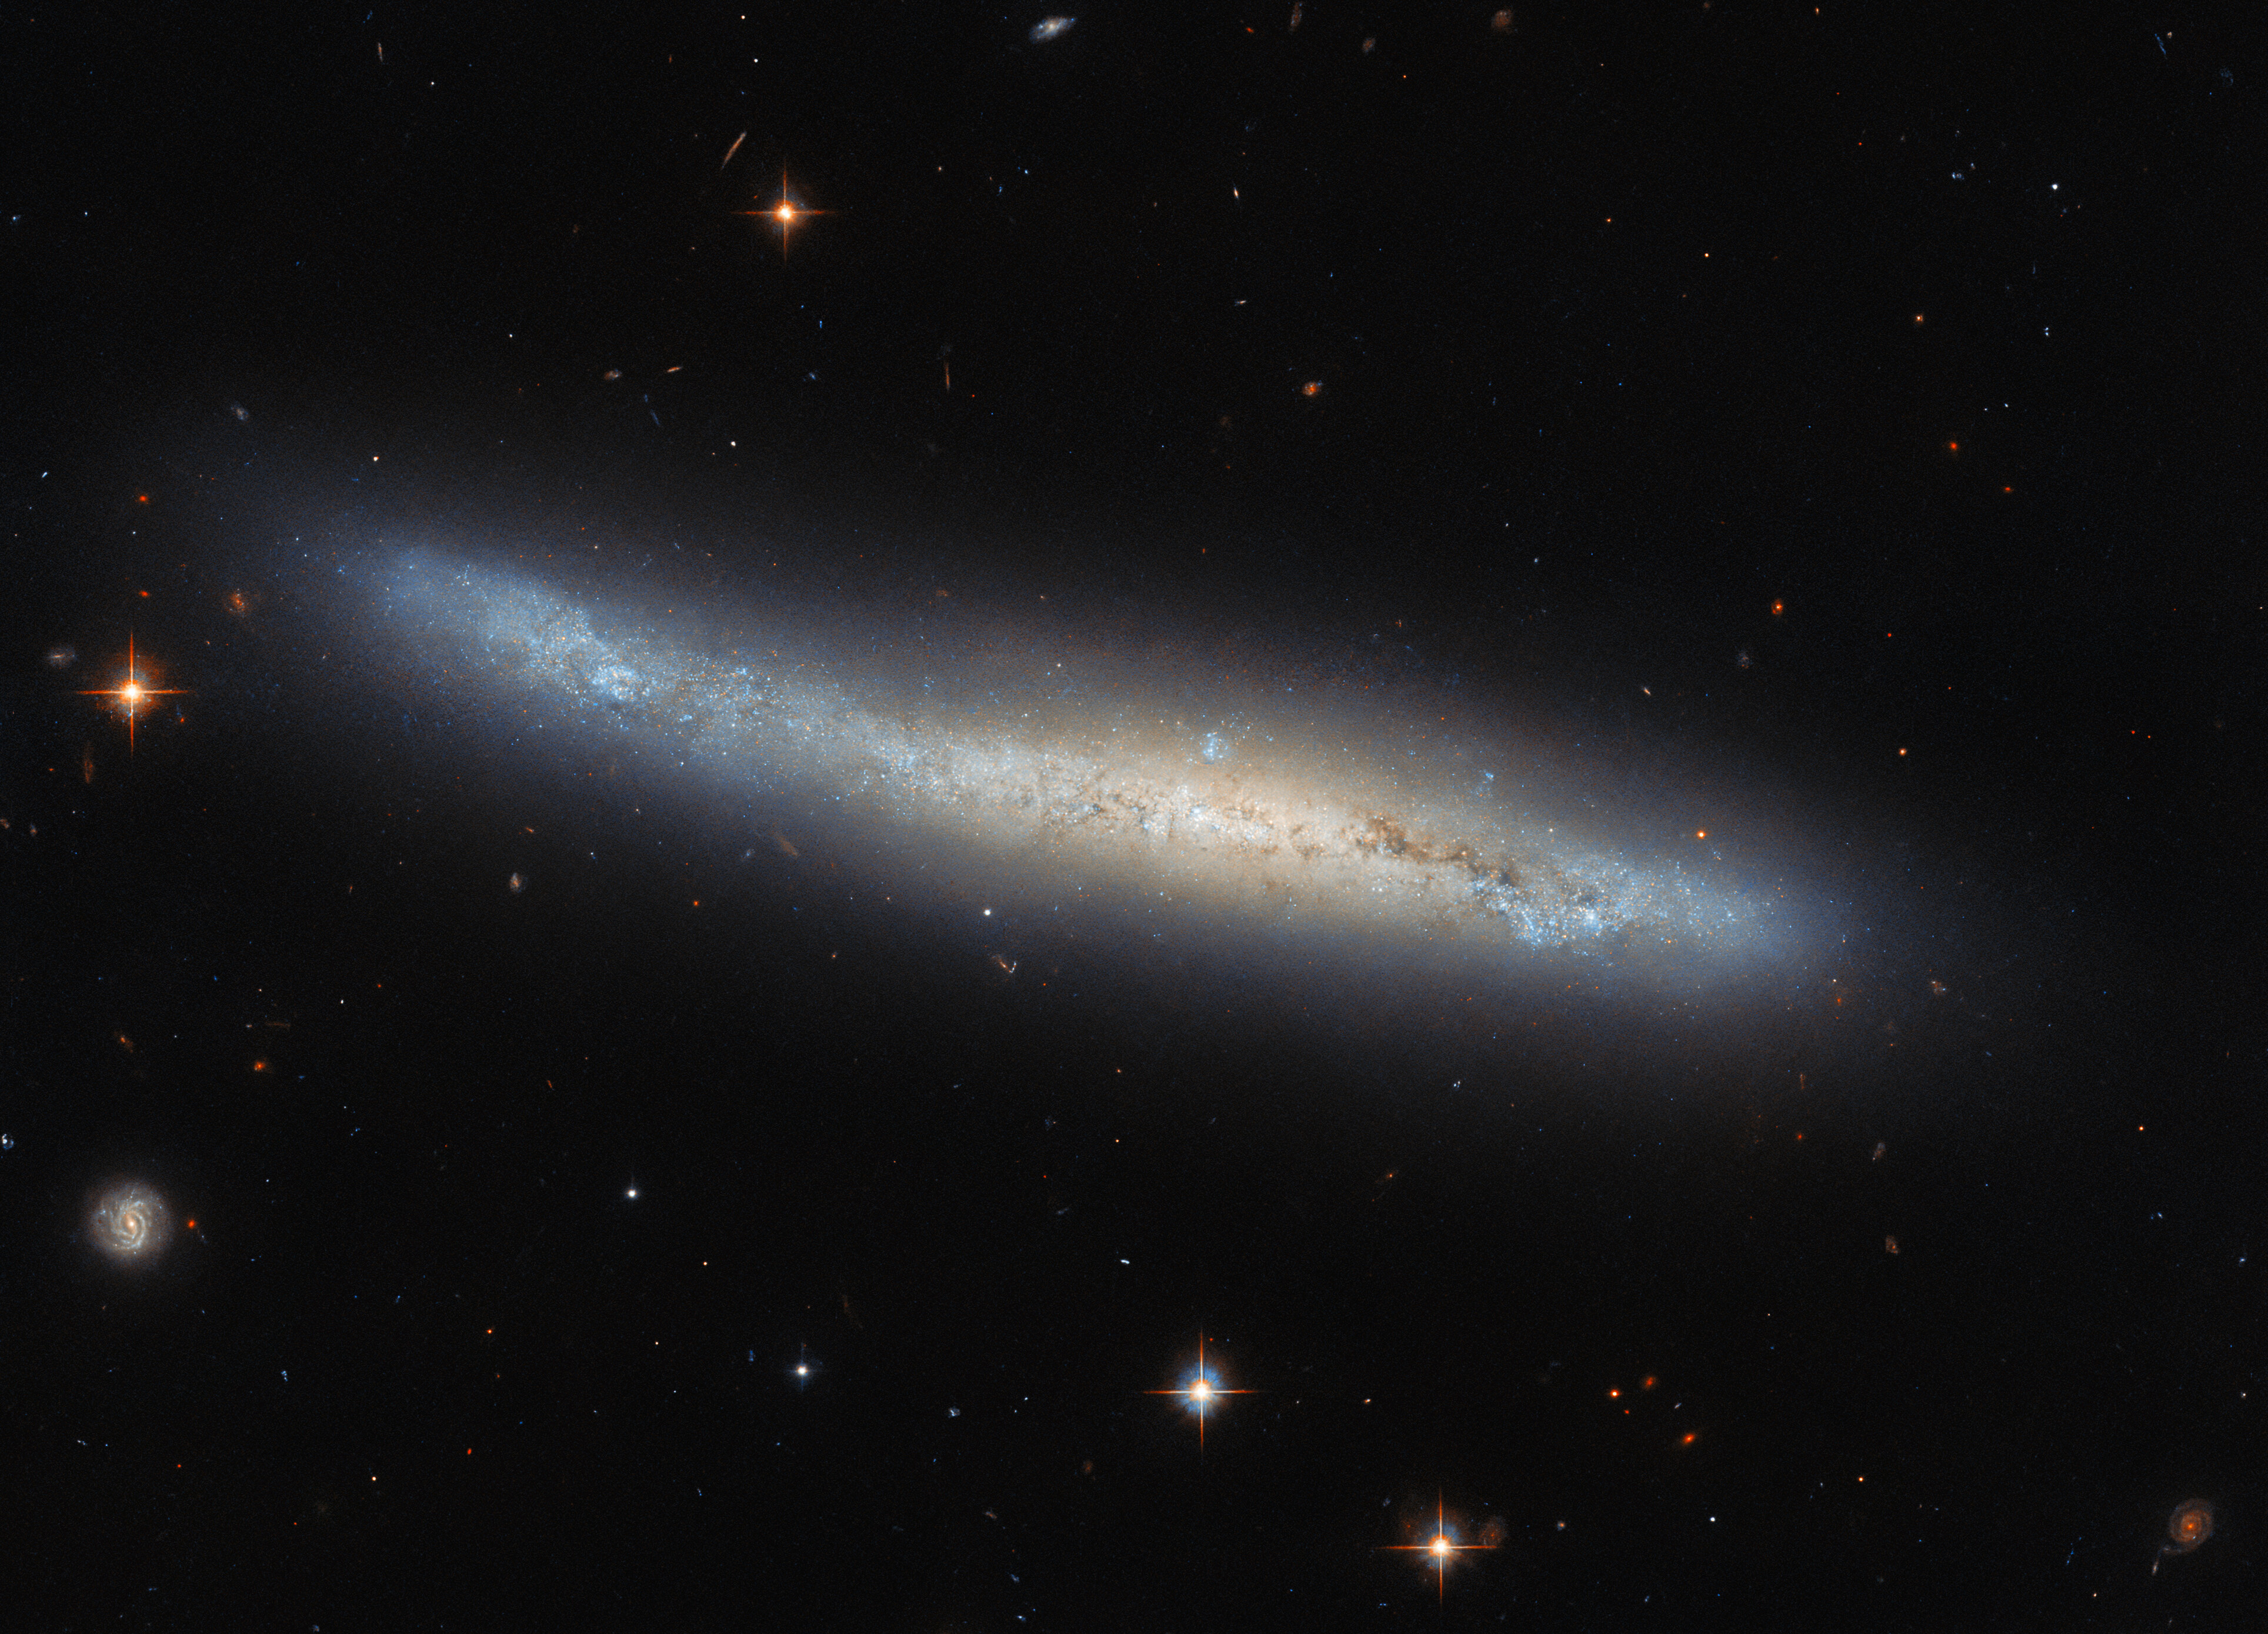 Hubble Sees a Spiral Galaxy Edge-On